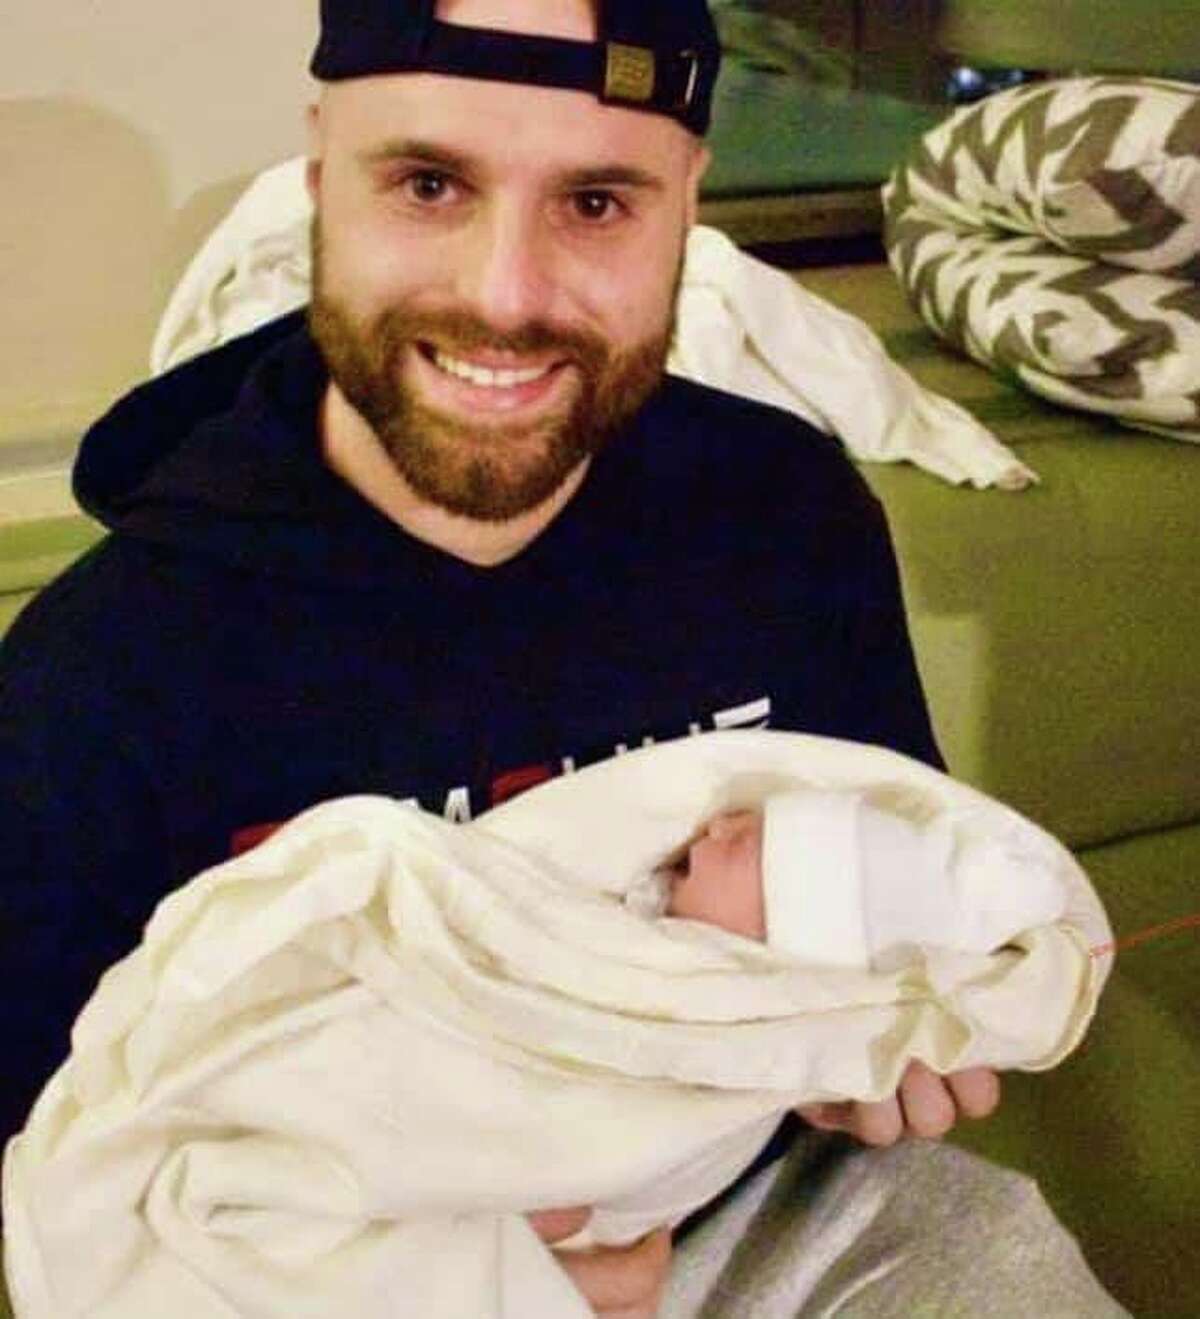 Dan Spano, with his niece, Adrianna. The 30-year-old personal trainer's family said he died Saturday, April 11 after contracting COVID-19